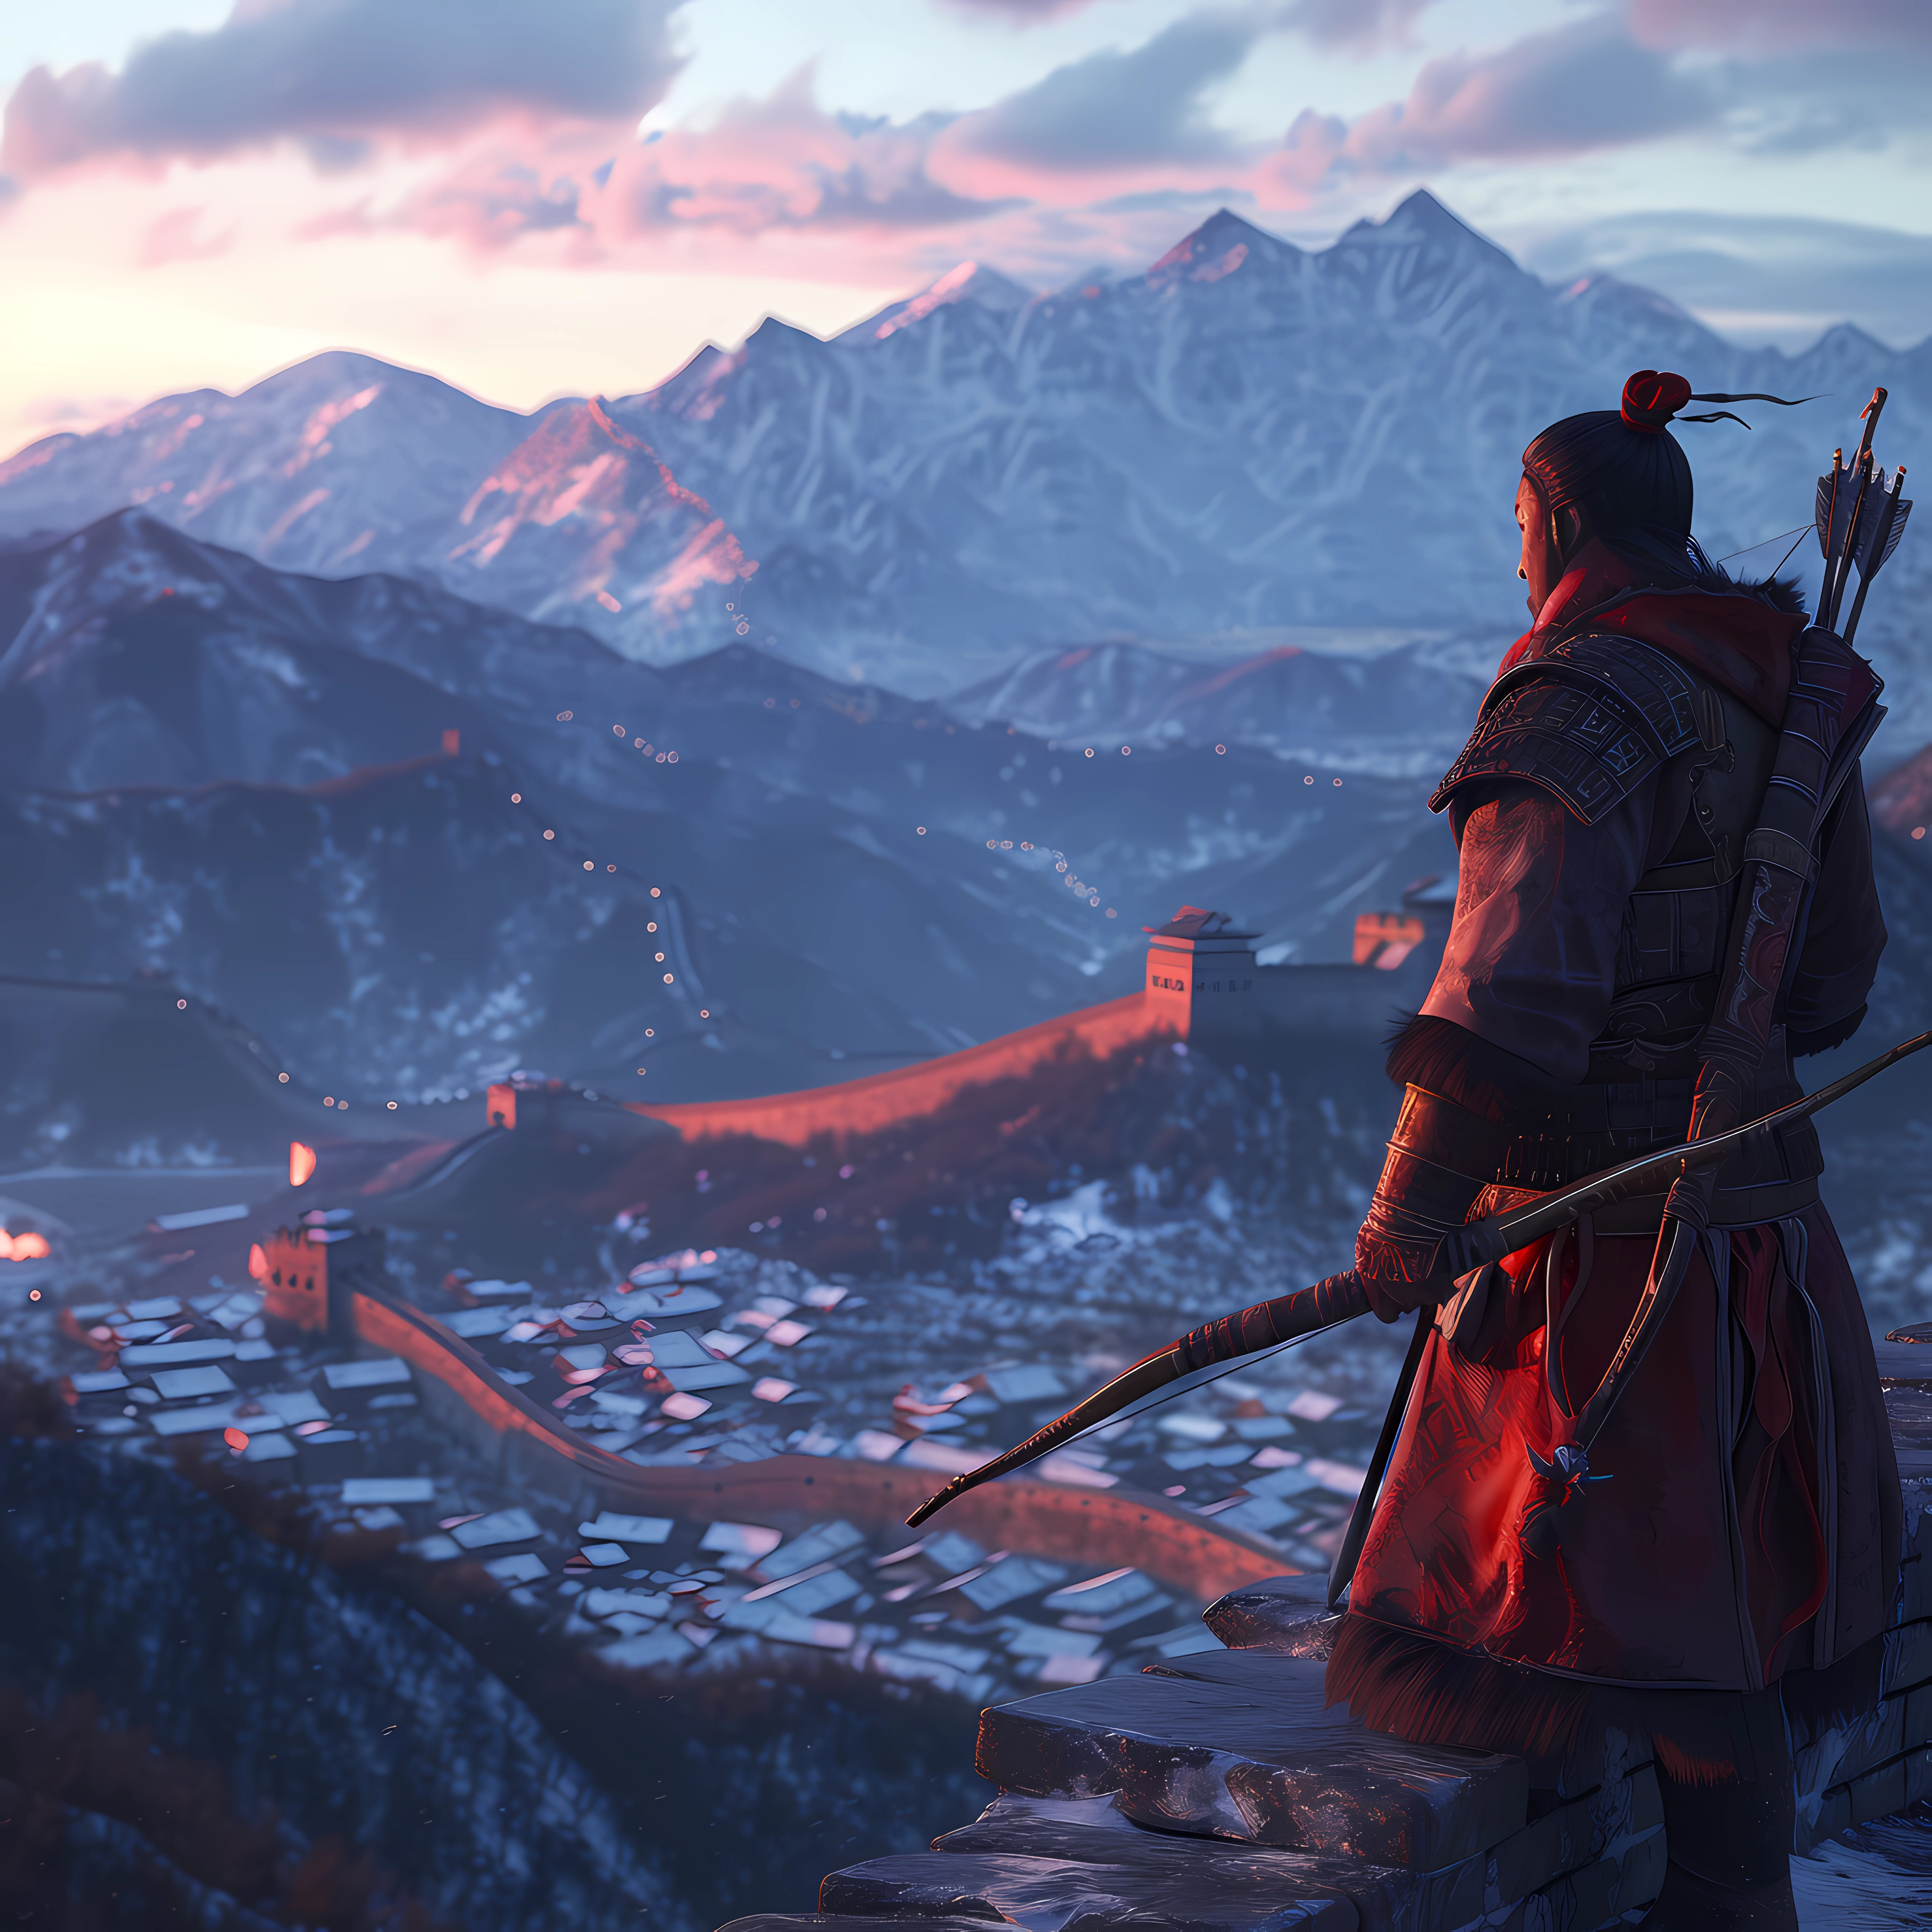 Fantasy depiction of an archer overlooking the Great Wall of China at dusk, conveying a sense of historical adventure.